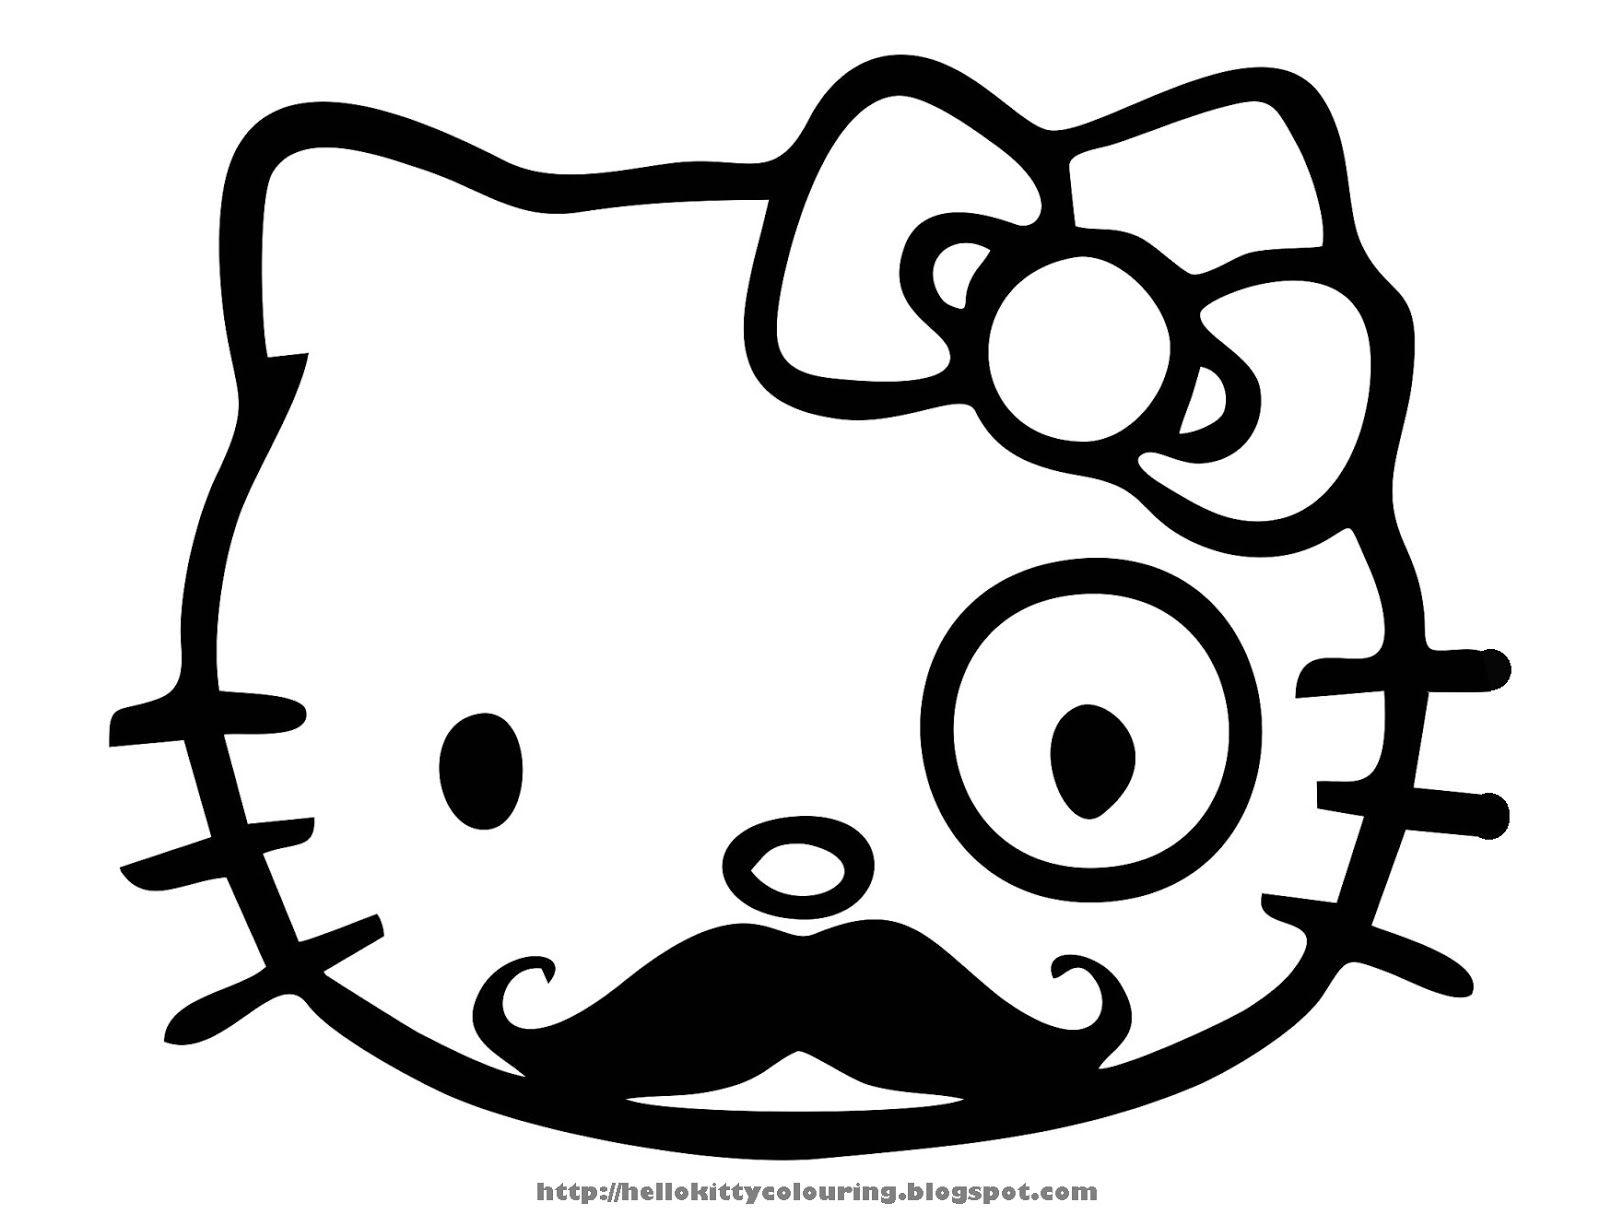 Awesome Colouring pages of hello kitty With Hello Kitty Coloring